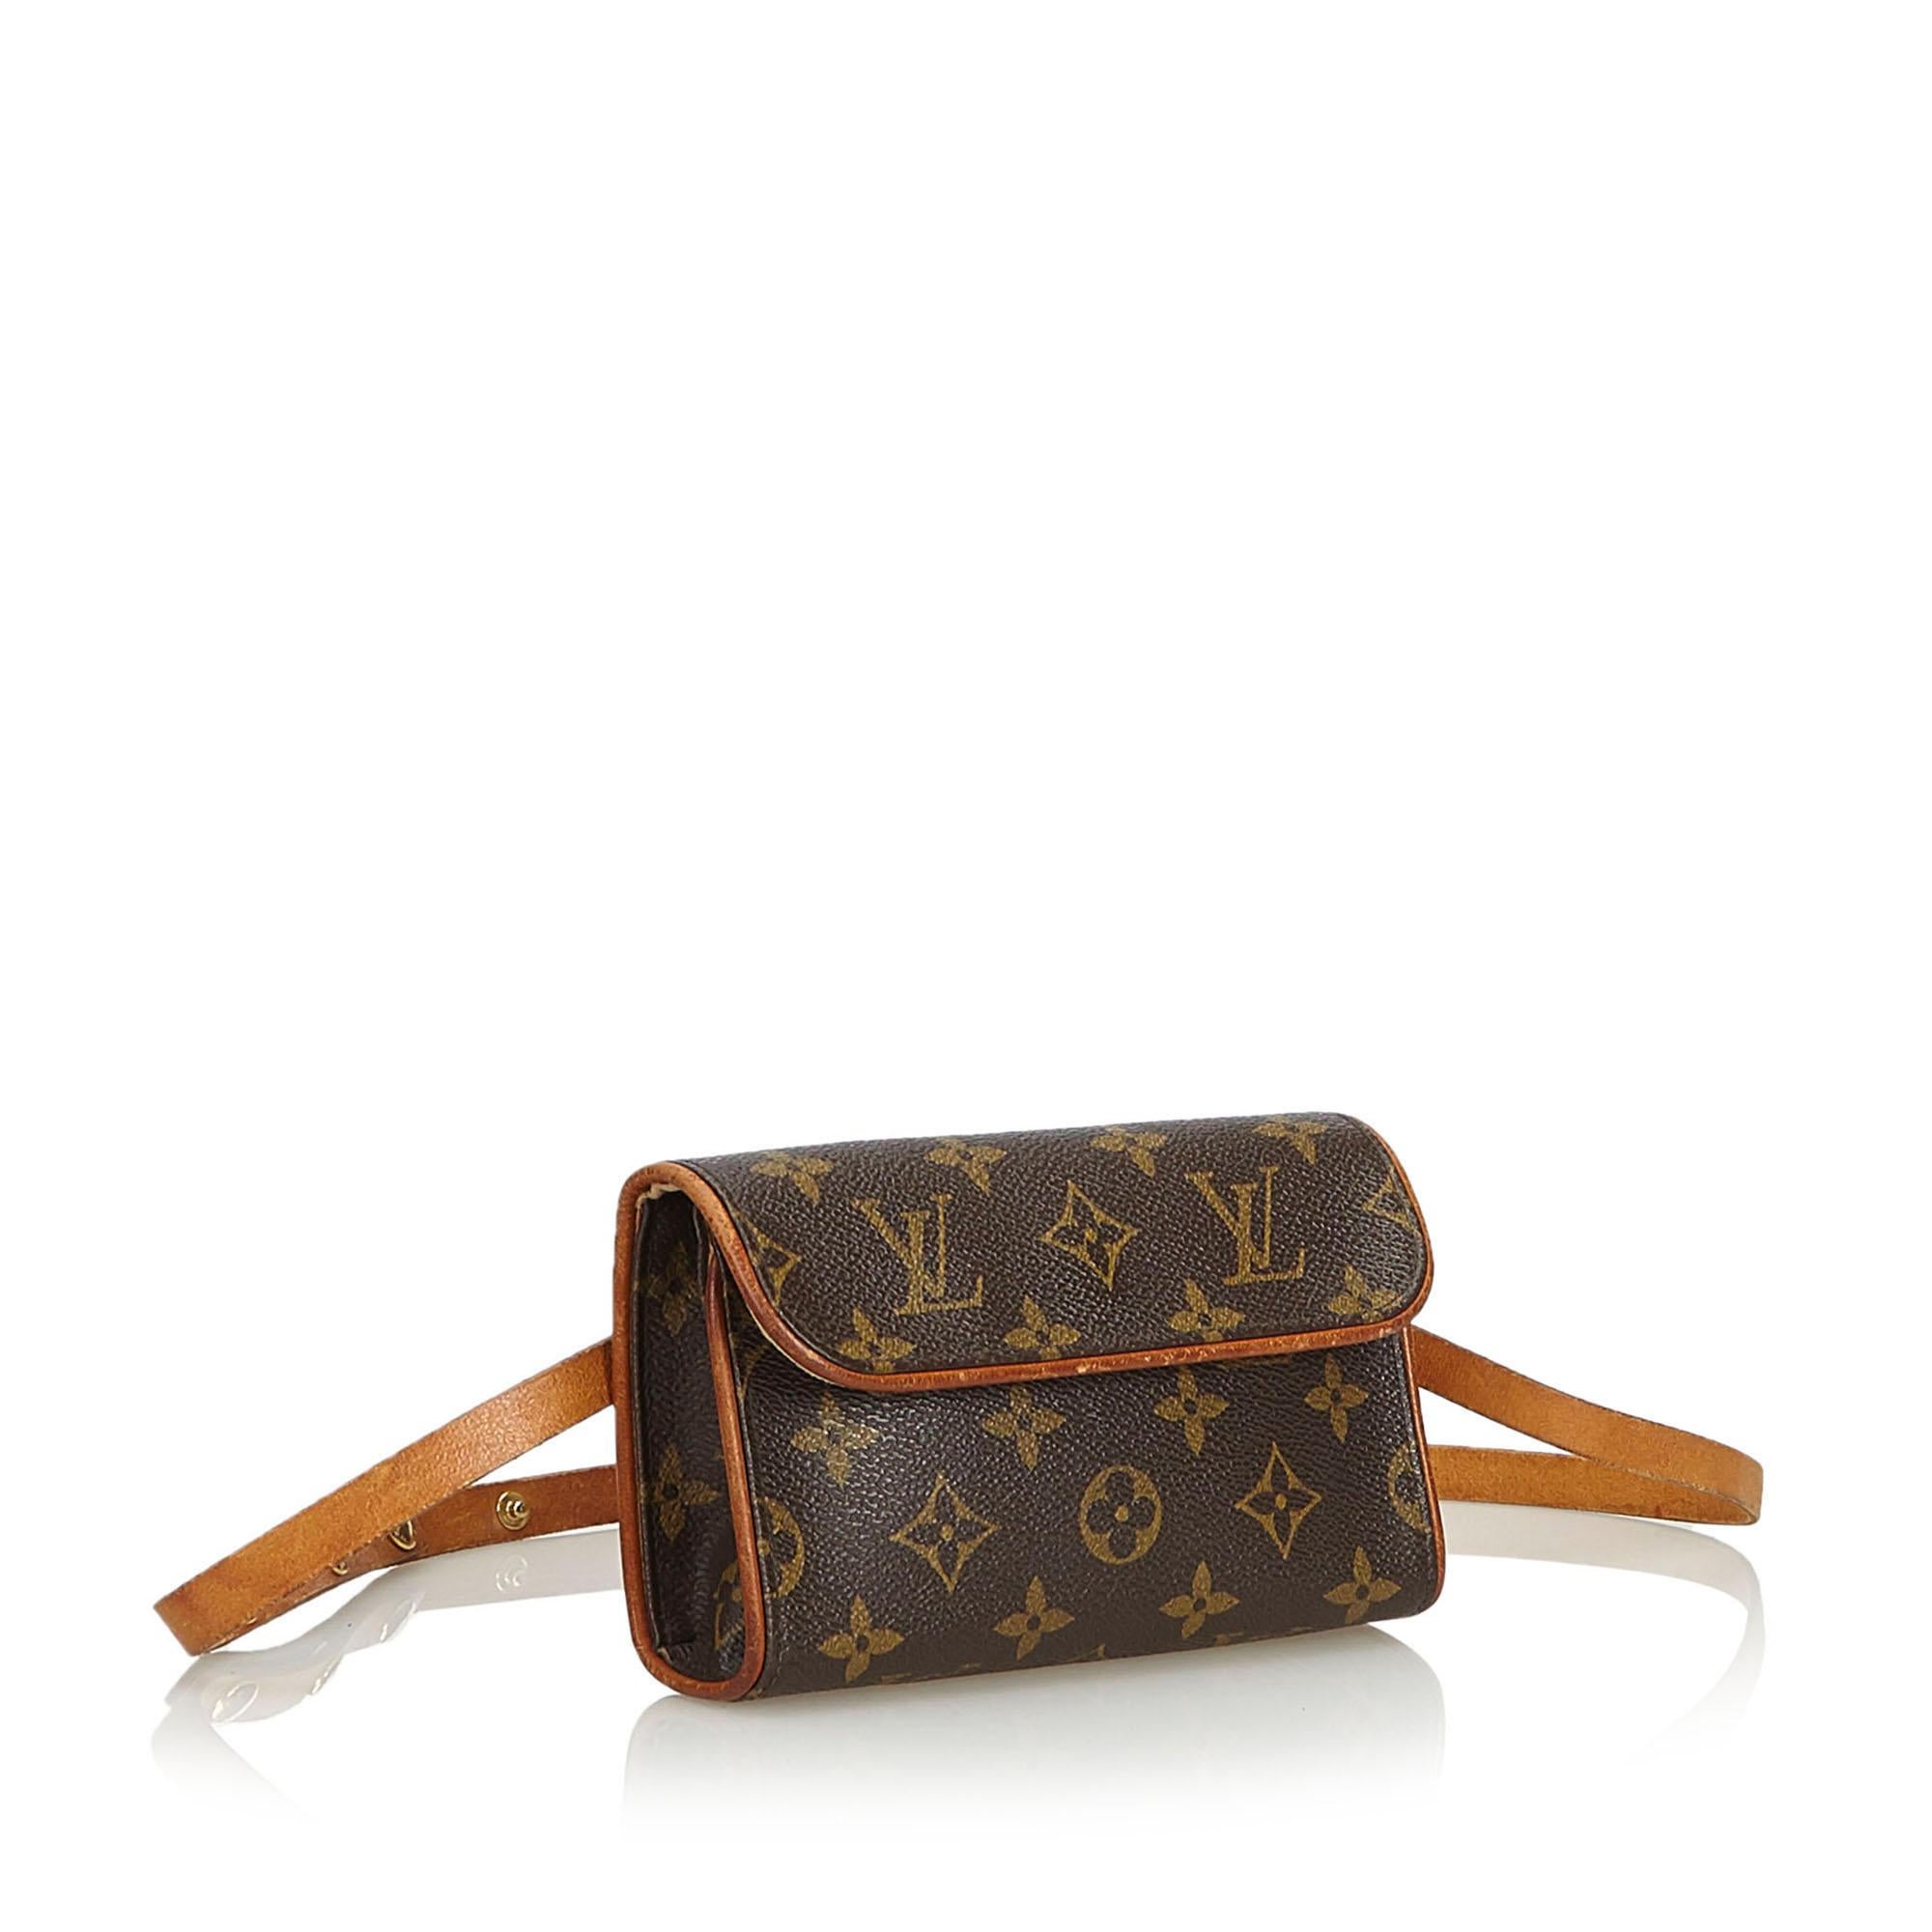 The Pochette Florentine features a front flap, leather tabs at the back for the belt, Alcantara lining, and a cowhide belt. It carries as B condition rating.

Inclusions: 
This item does not come with inclusions.


Louis Vuitton pieces do not come